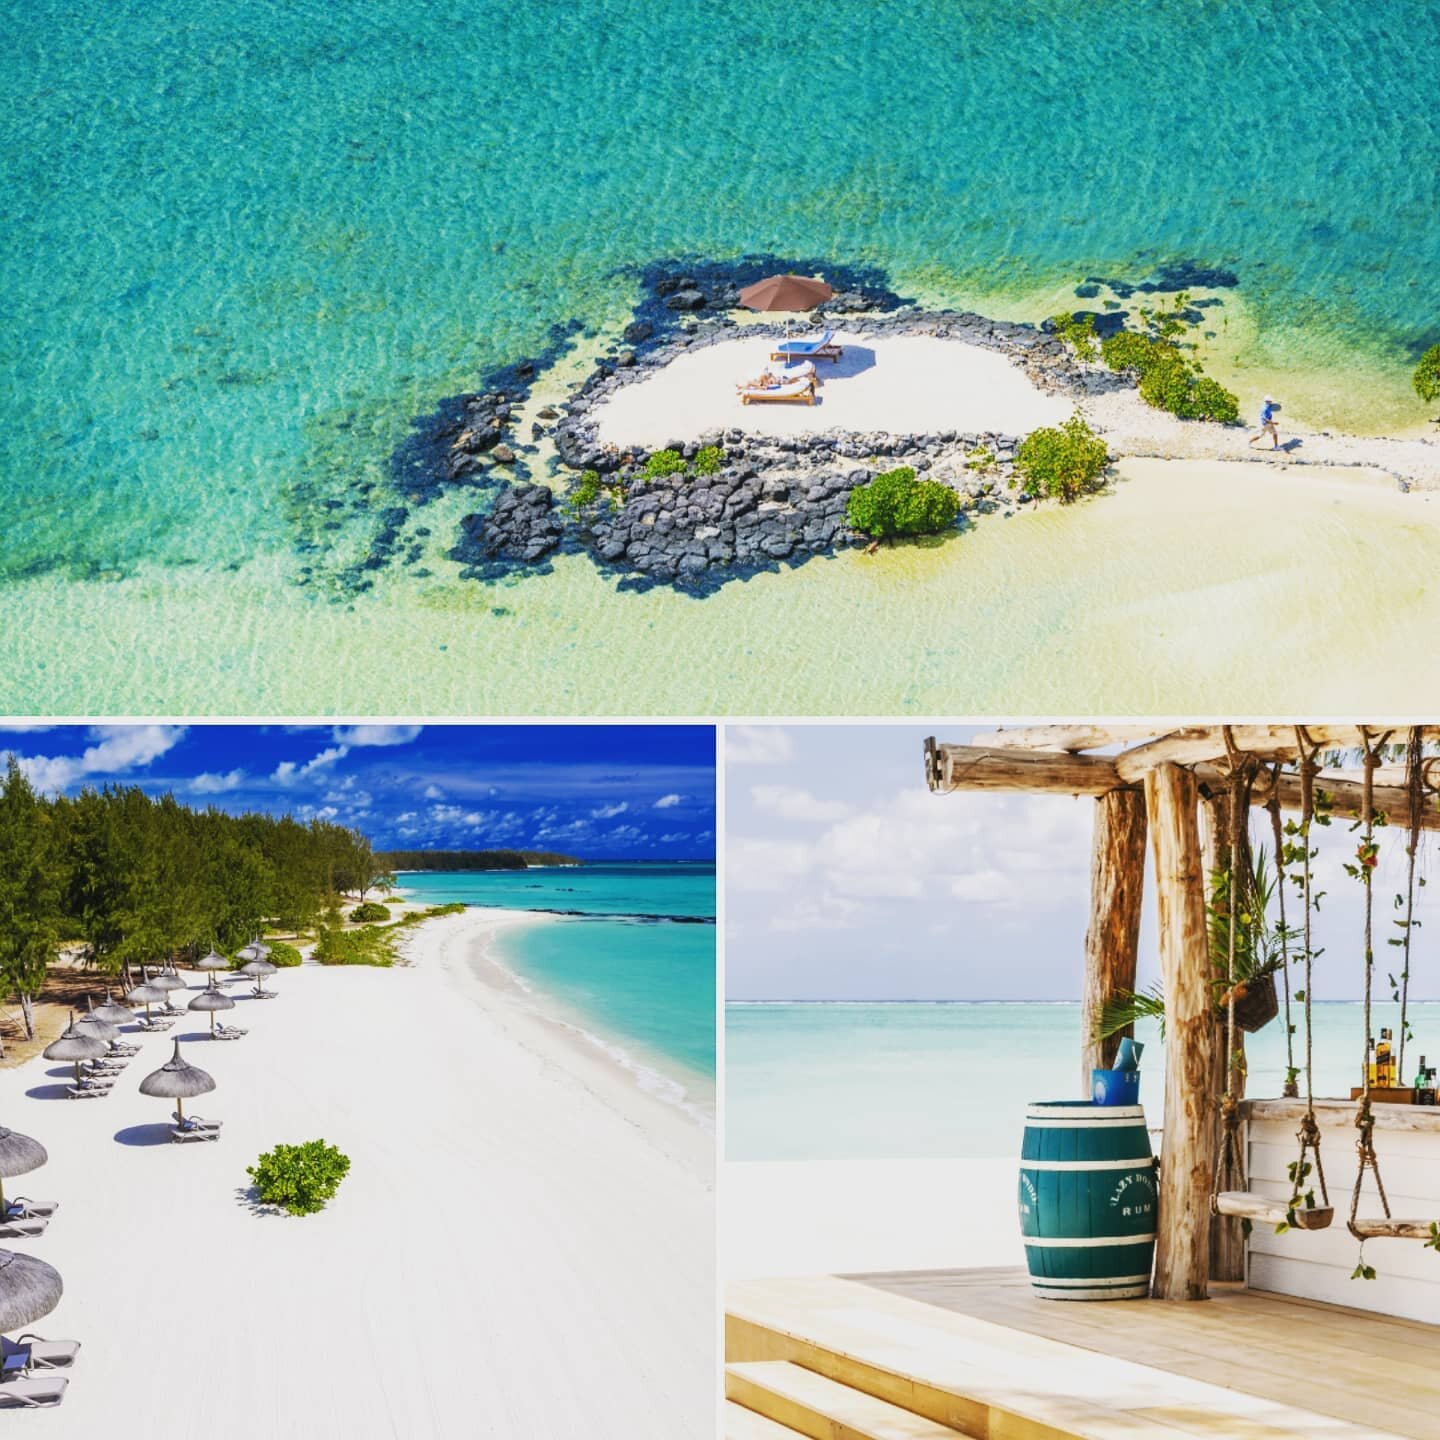 'Guests can while away the afternoon with lazy dodo rum cocktails on rope swing seats at a rustic thatched beach bar'. @telegraphtravel 

We were so pleased to hear yesterday that Mauritius has been taken off the UK's 'red list' of countries. 

This 